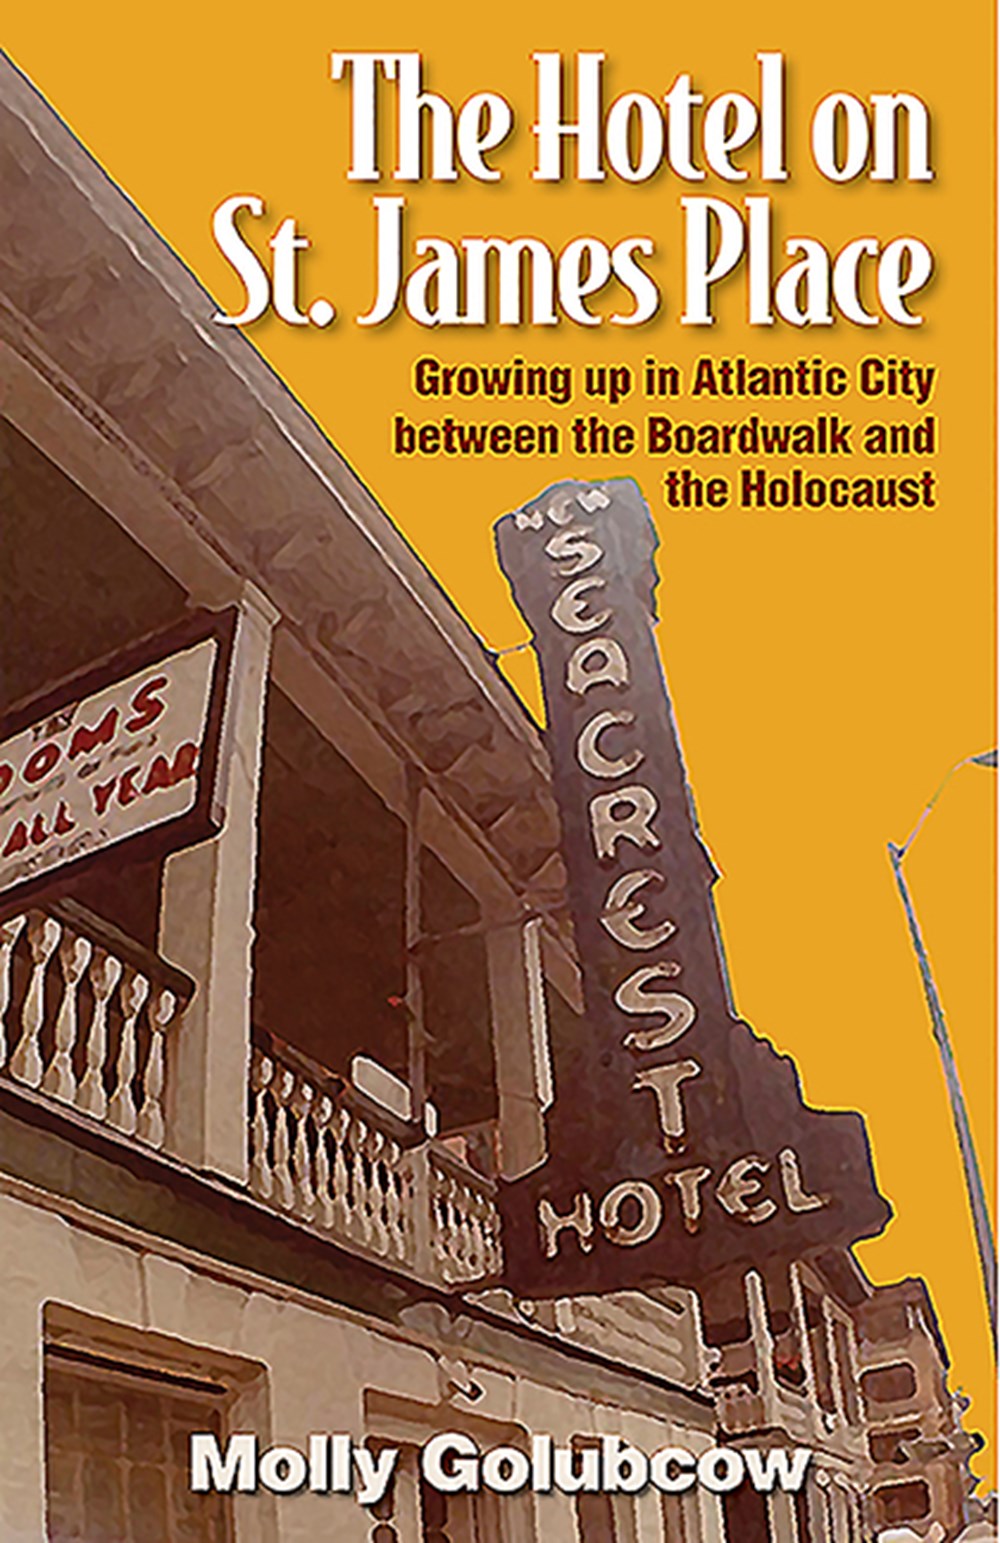 Hotel on St. James Place Growing Up in Atlantic City Between the Boardwalk and the Holocaust